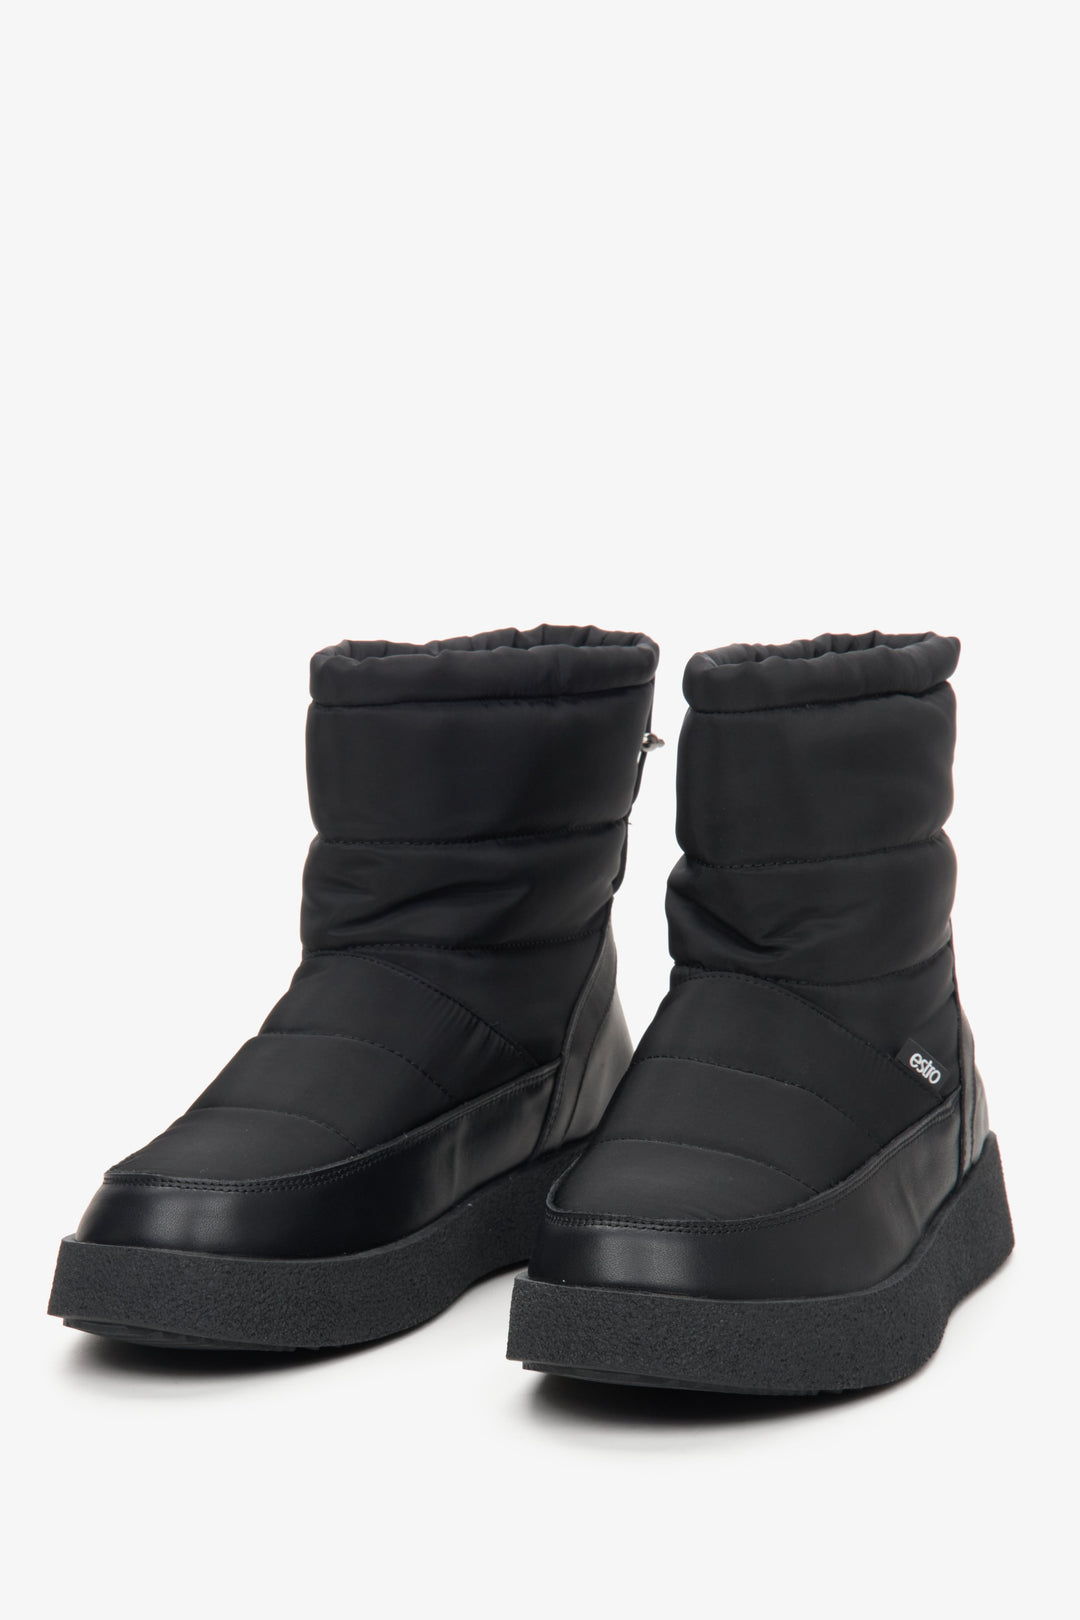 Women's black snow boots with fur lining by Estro - close-up on the toe of the shoe.